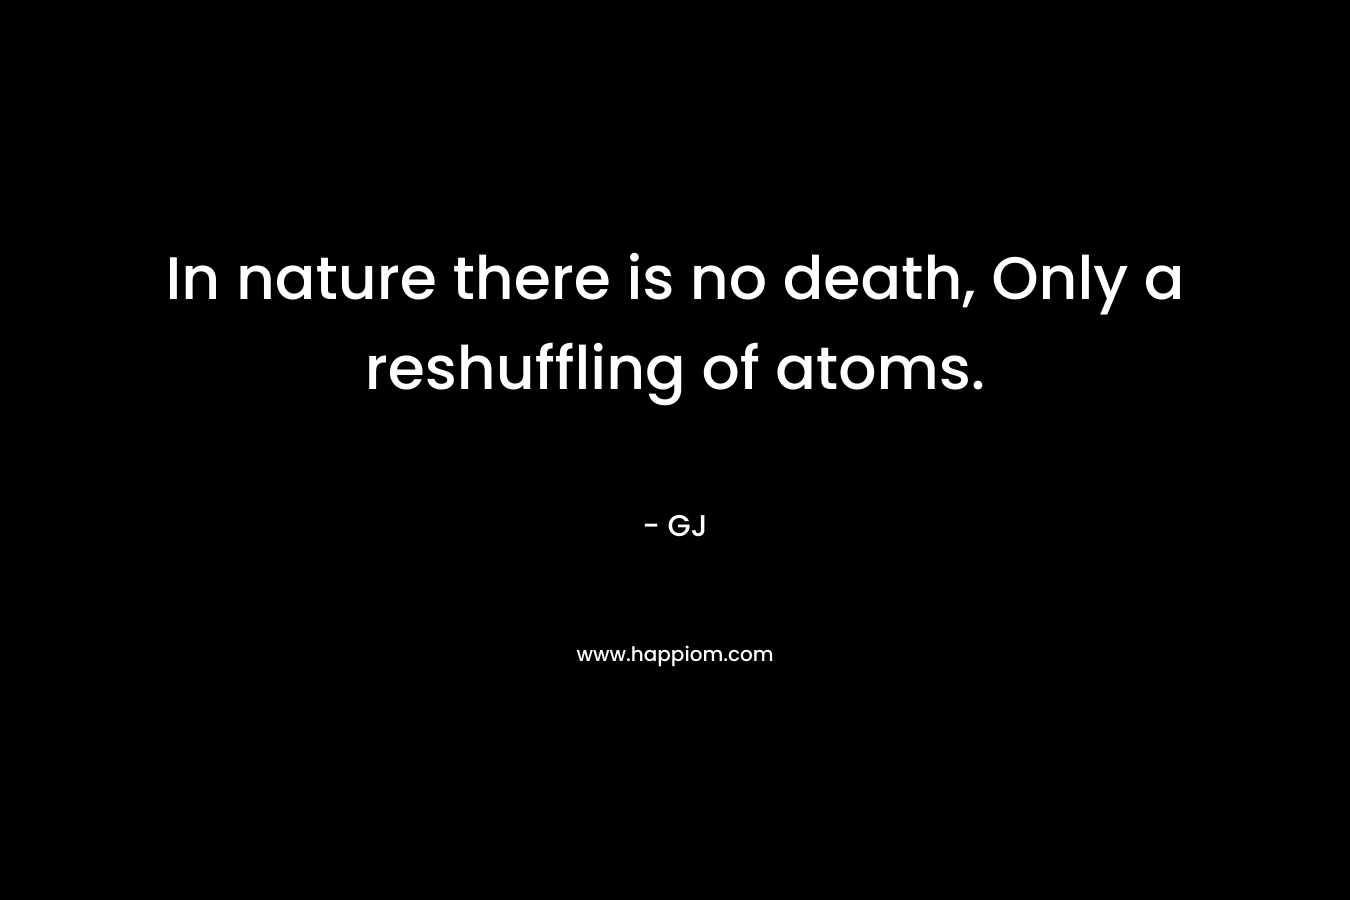 In nature there is no death, Only a reshuffling of atoms. – GJ